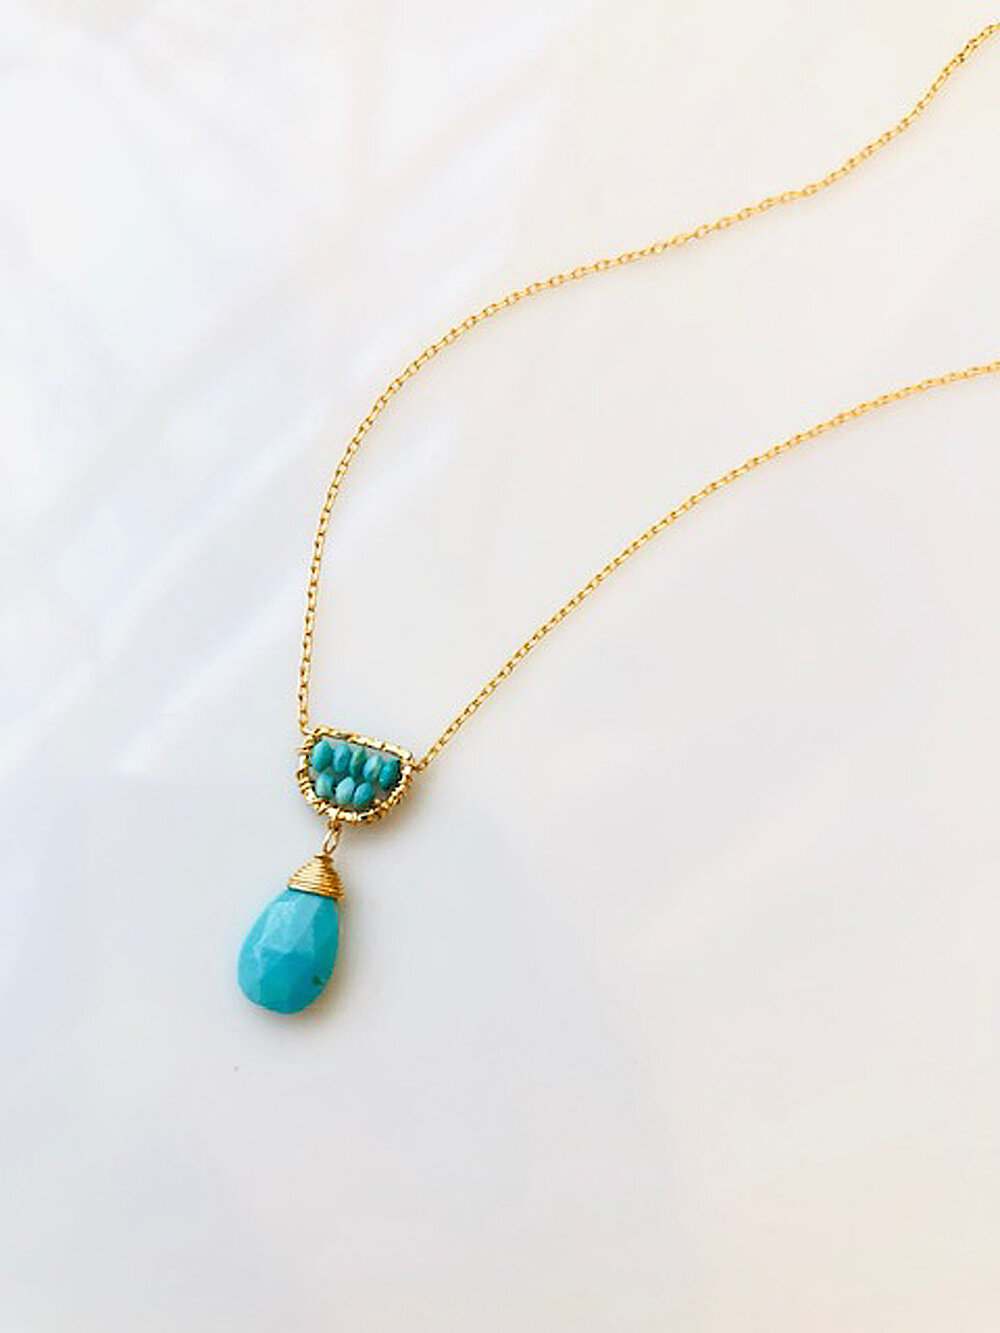 Arizona Sleeping Beauty Turquoise, Natural Zircon and Neon Apatite Pendant  with Chain (Size 20) in 18K Yellow Gold Vermeil Plated Sterling Silver 2.69  Ct. - 4158501 - TJC